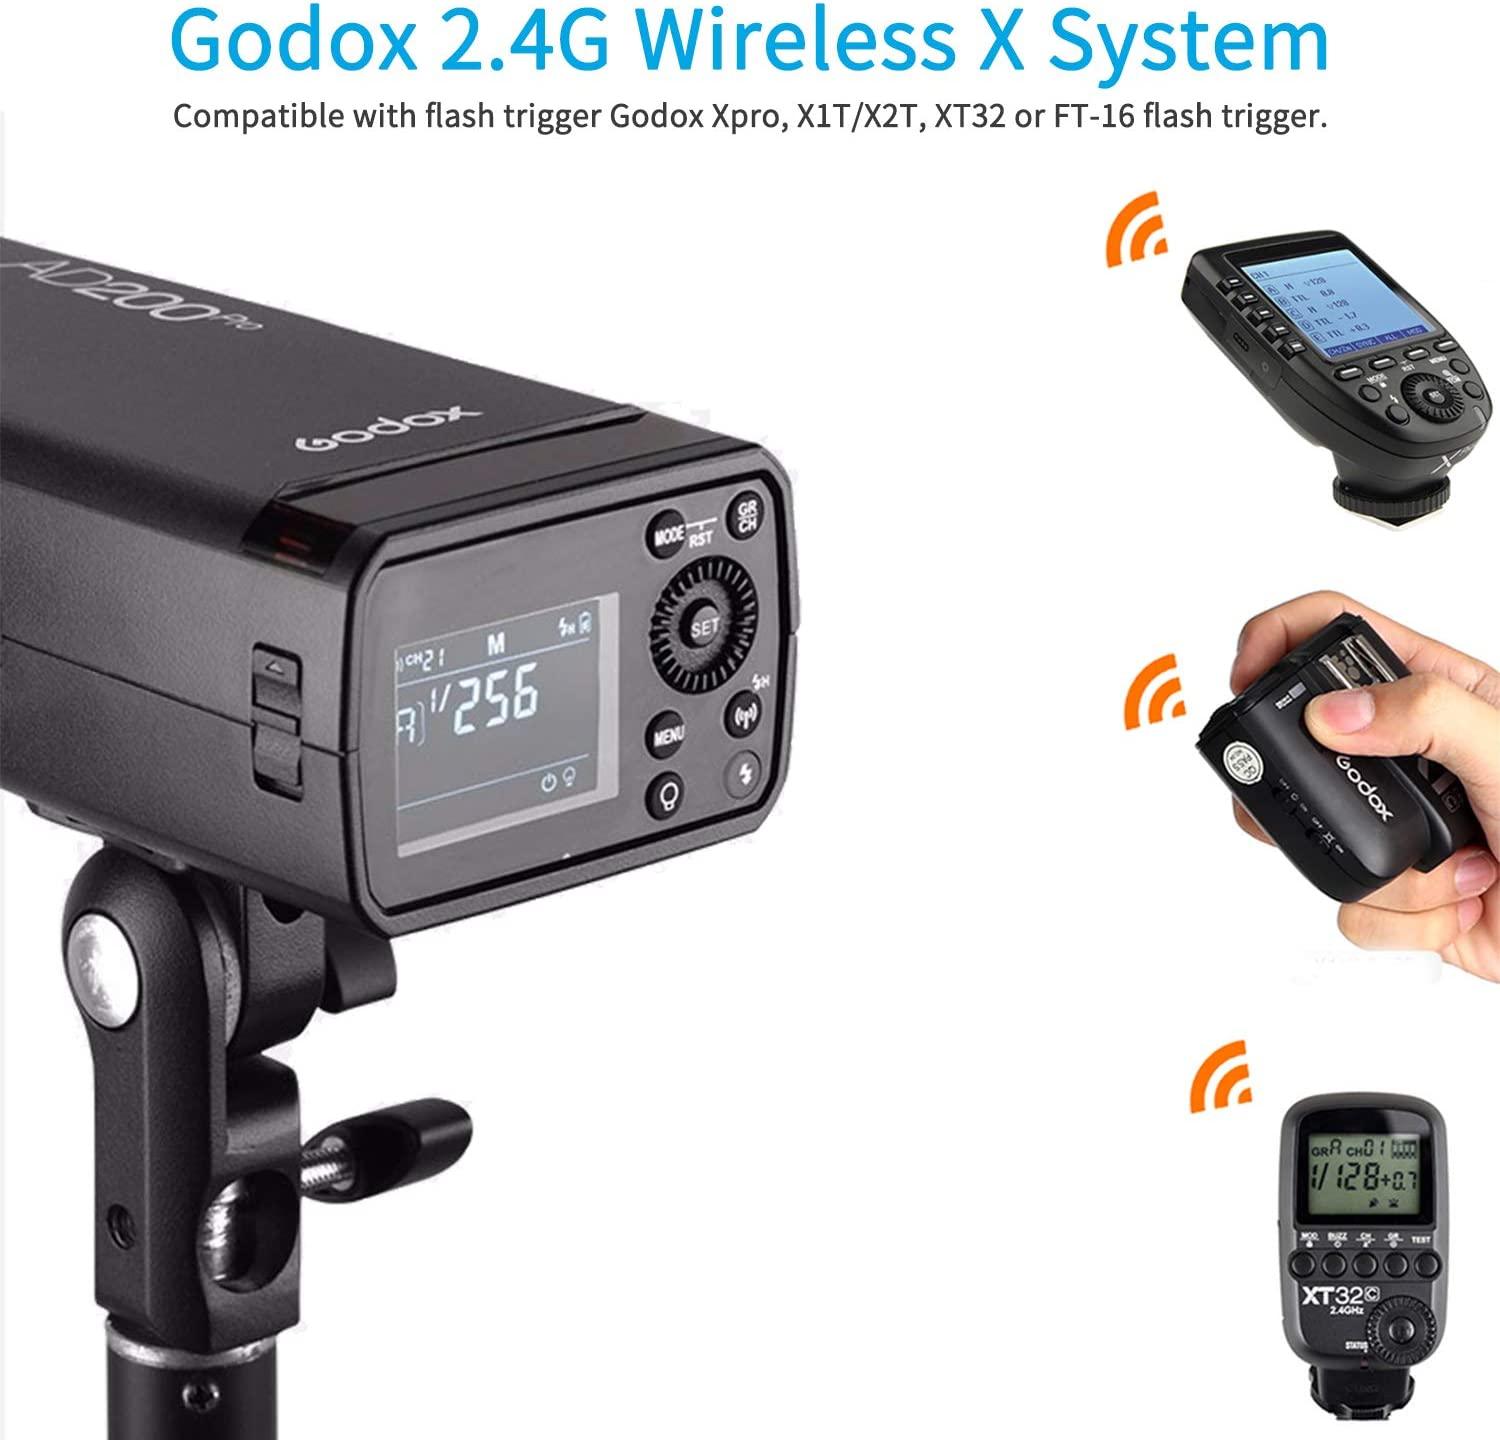 Why Godox AD200Pro worth your money not AD200 